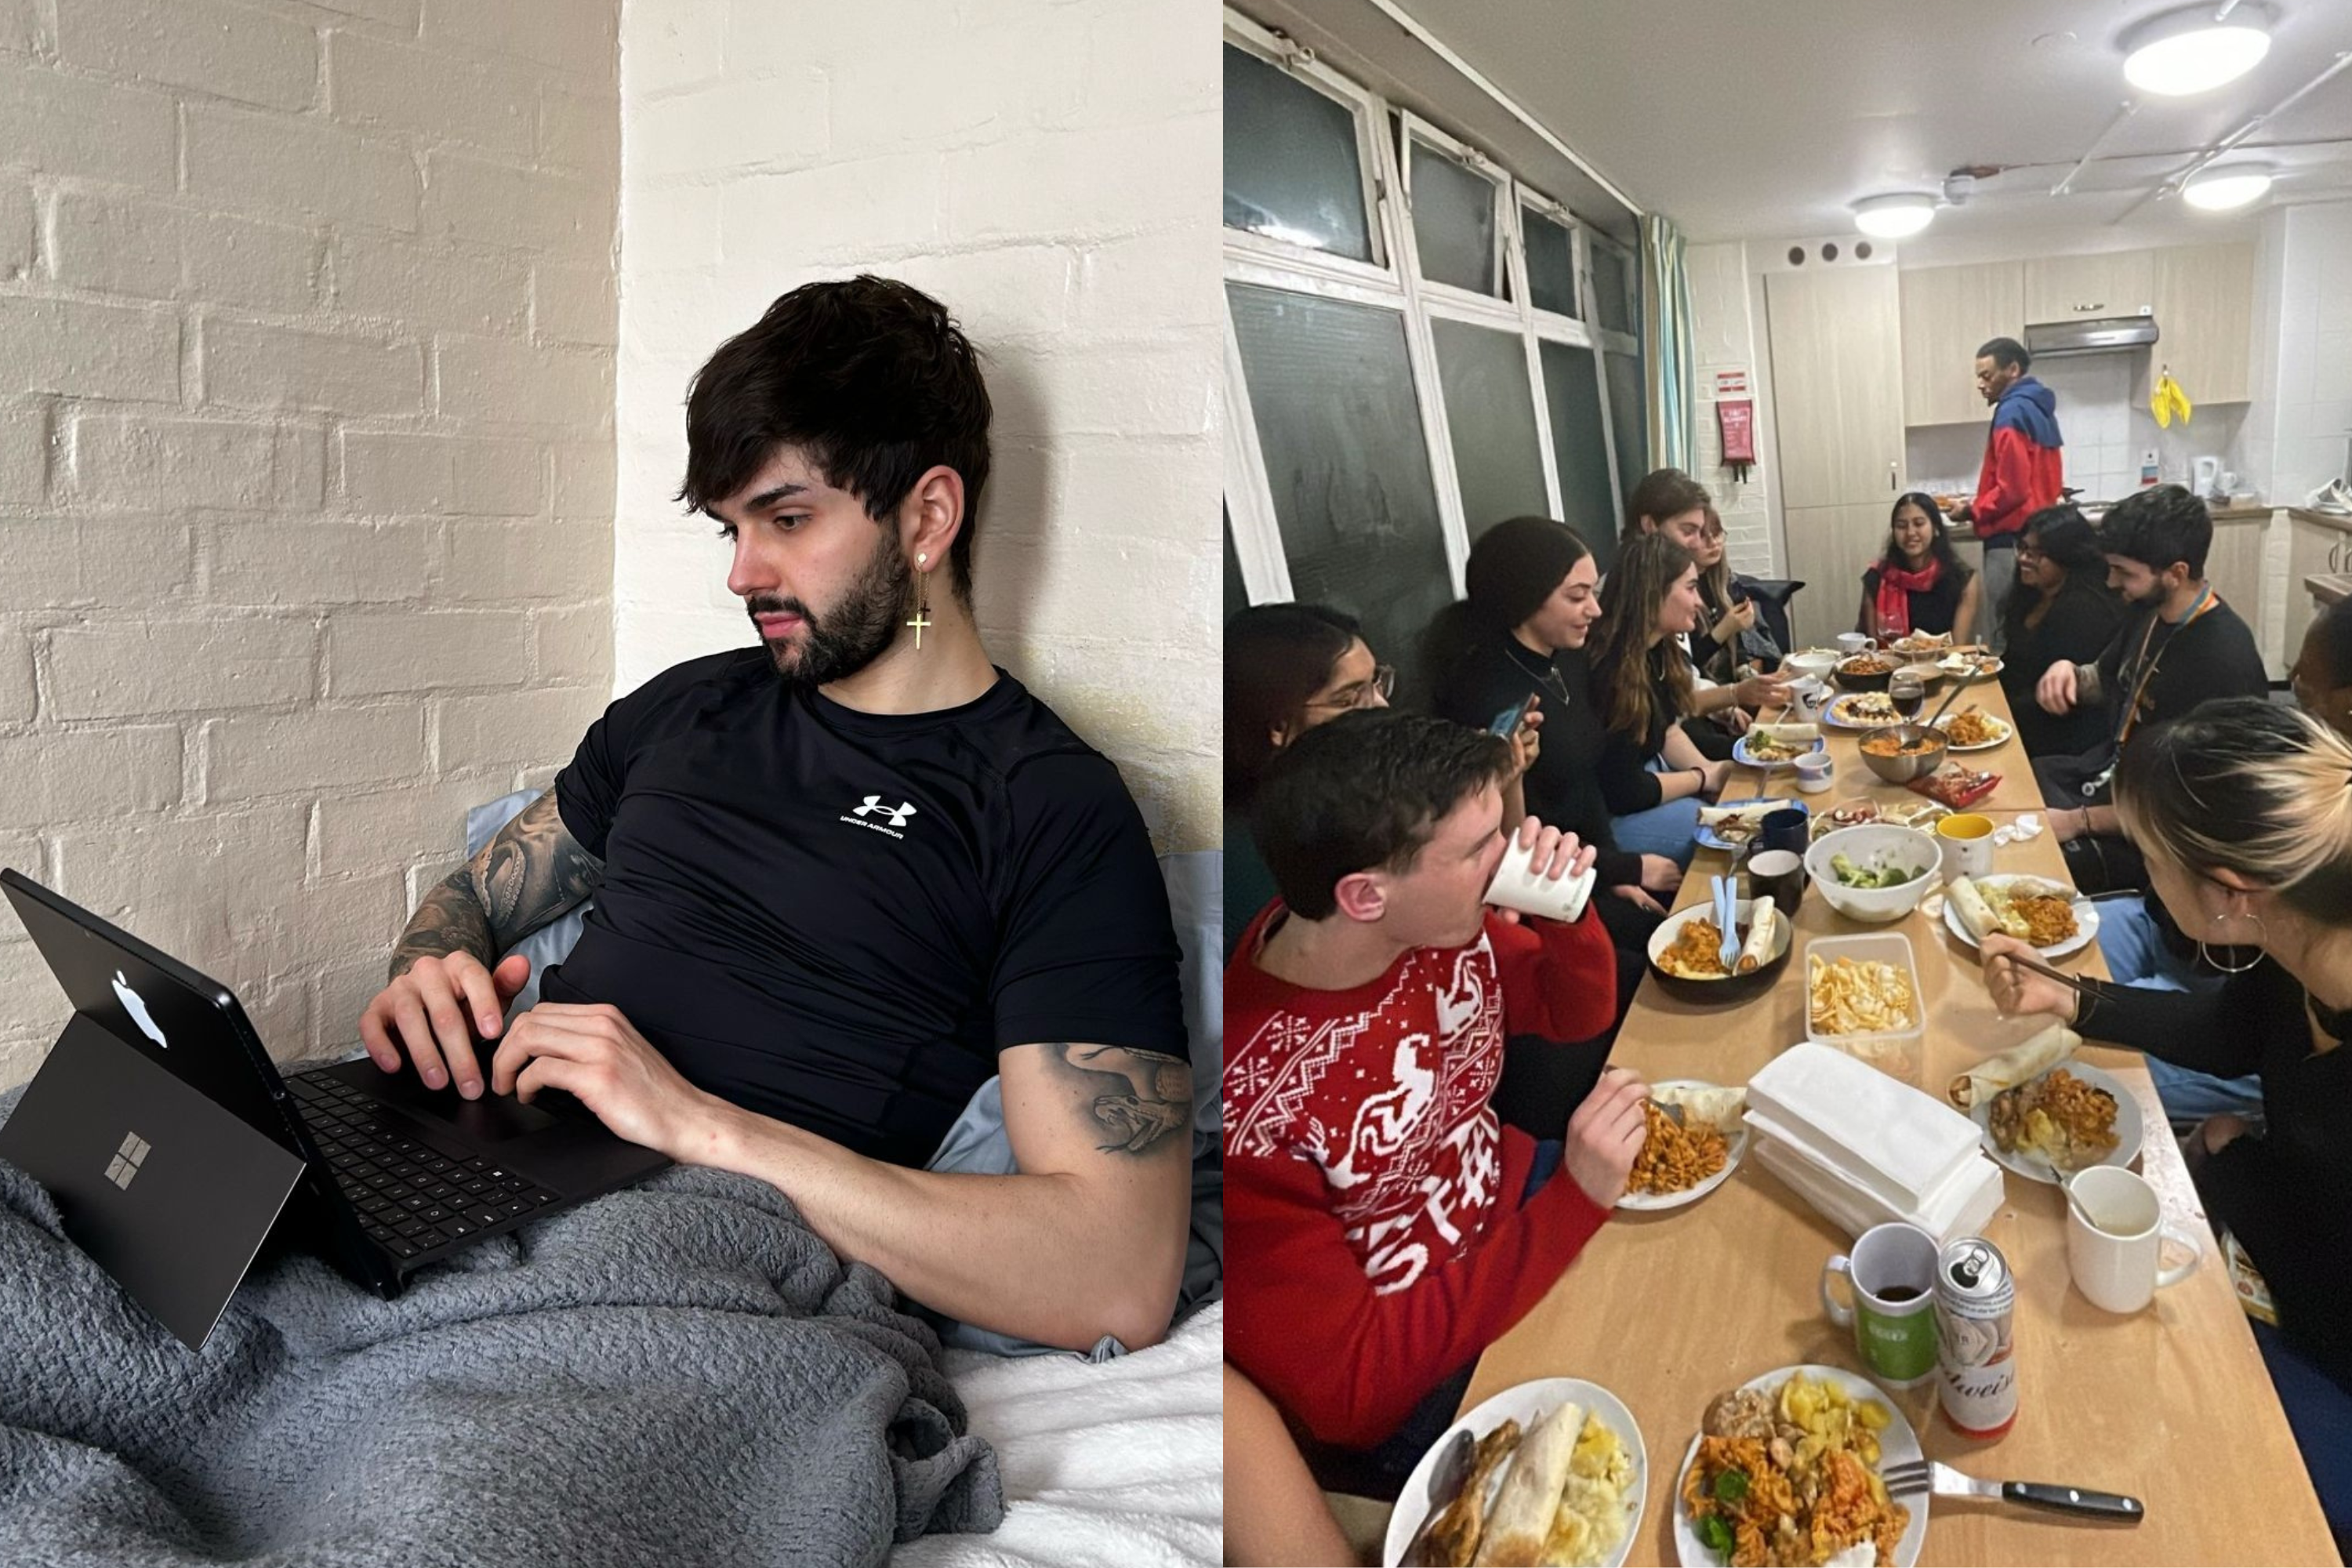 Michael sitting on bed in north towers, and a group of students having dinner in the kitchen